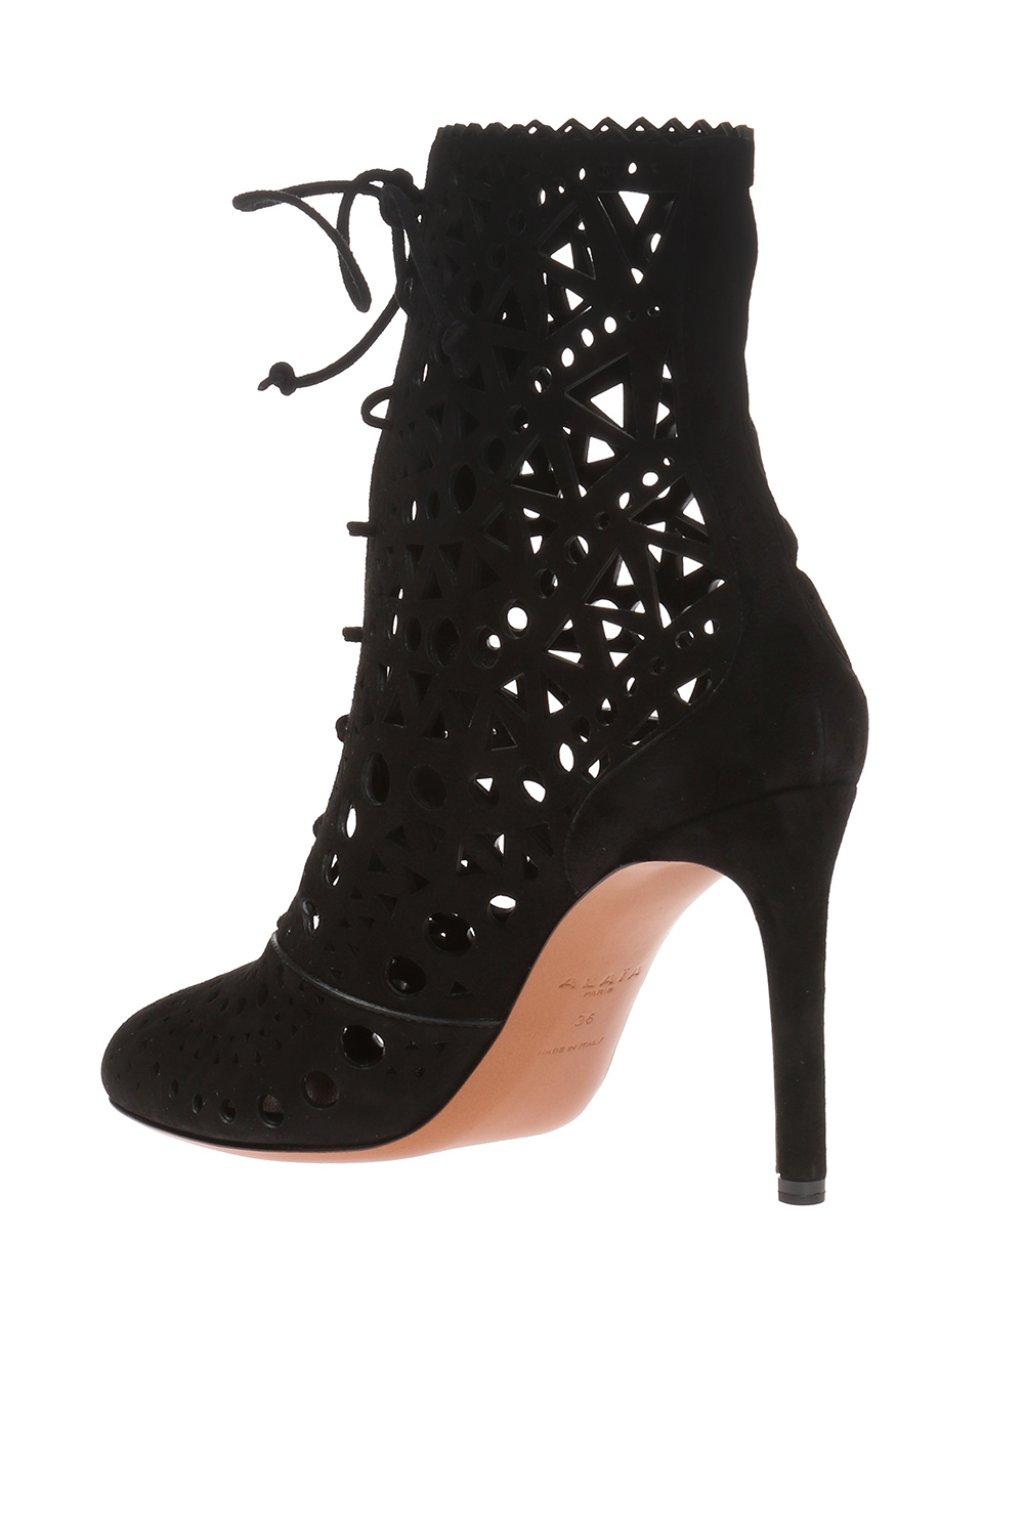 Alaïa Suede Heeled Boots With An Openwork Pattern in Black - Lyst